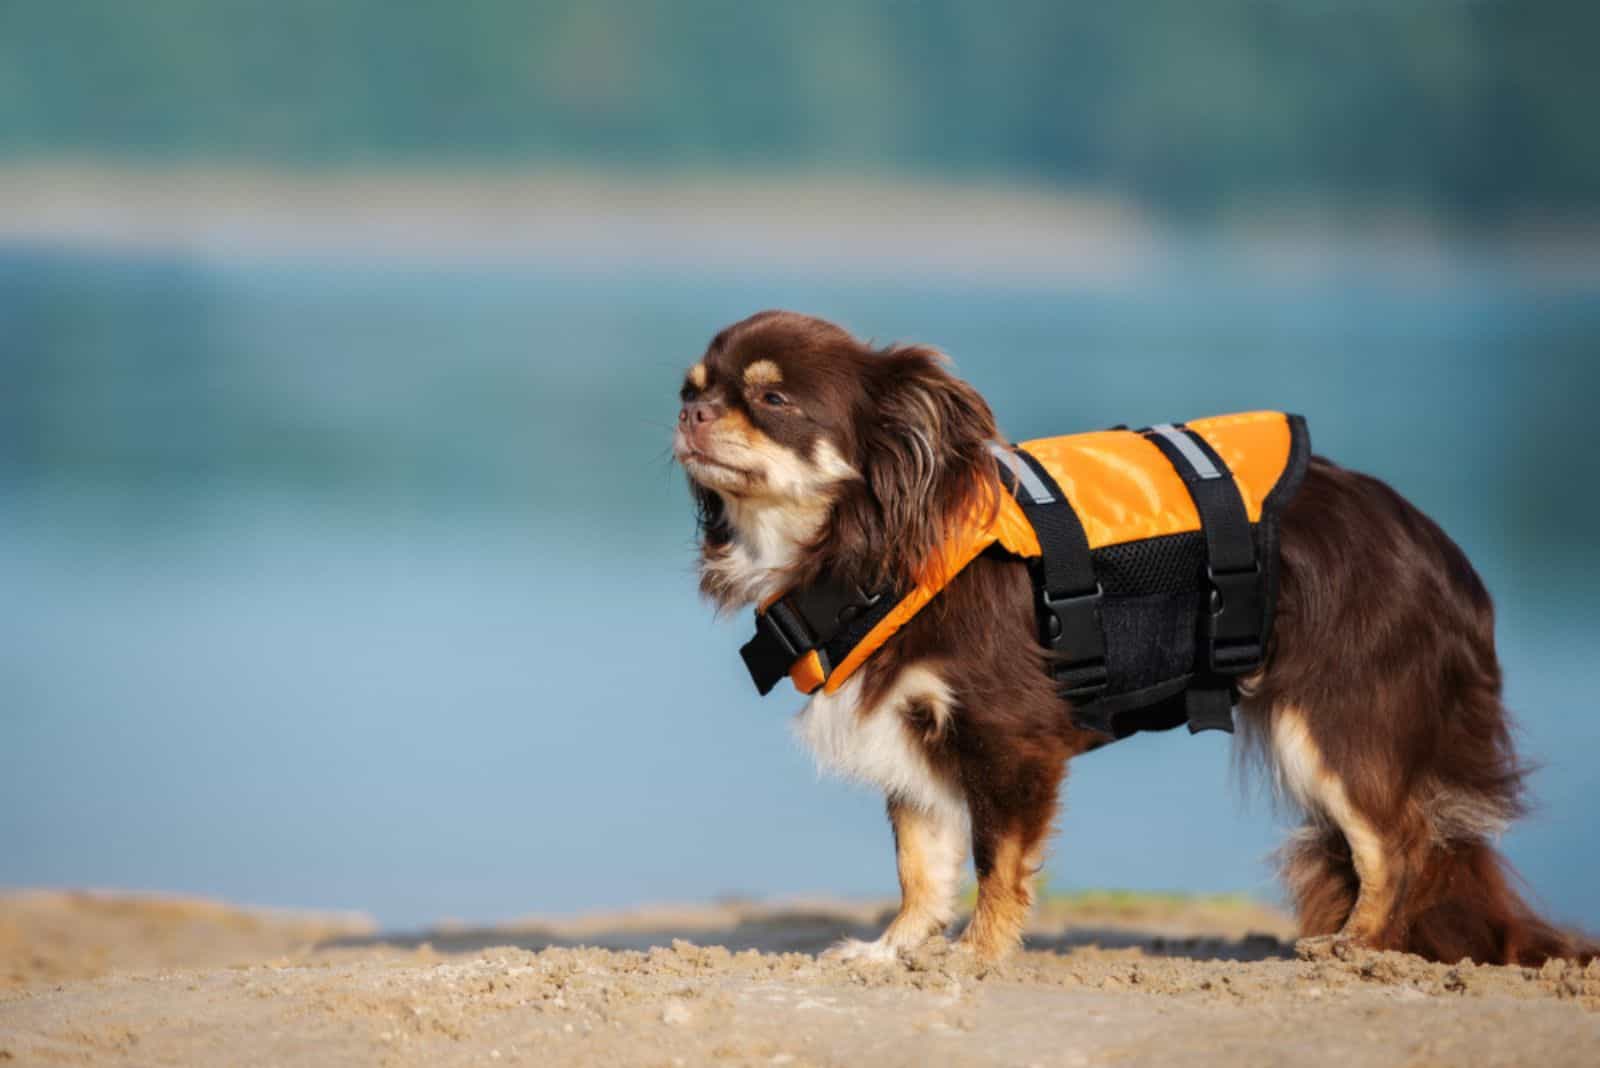 A chihuahua with a life jacket is standing on the beach